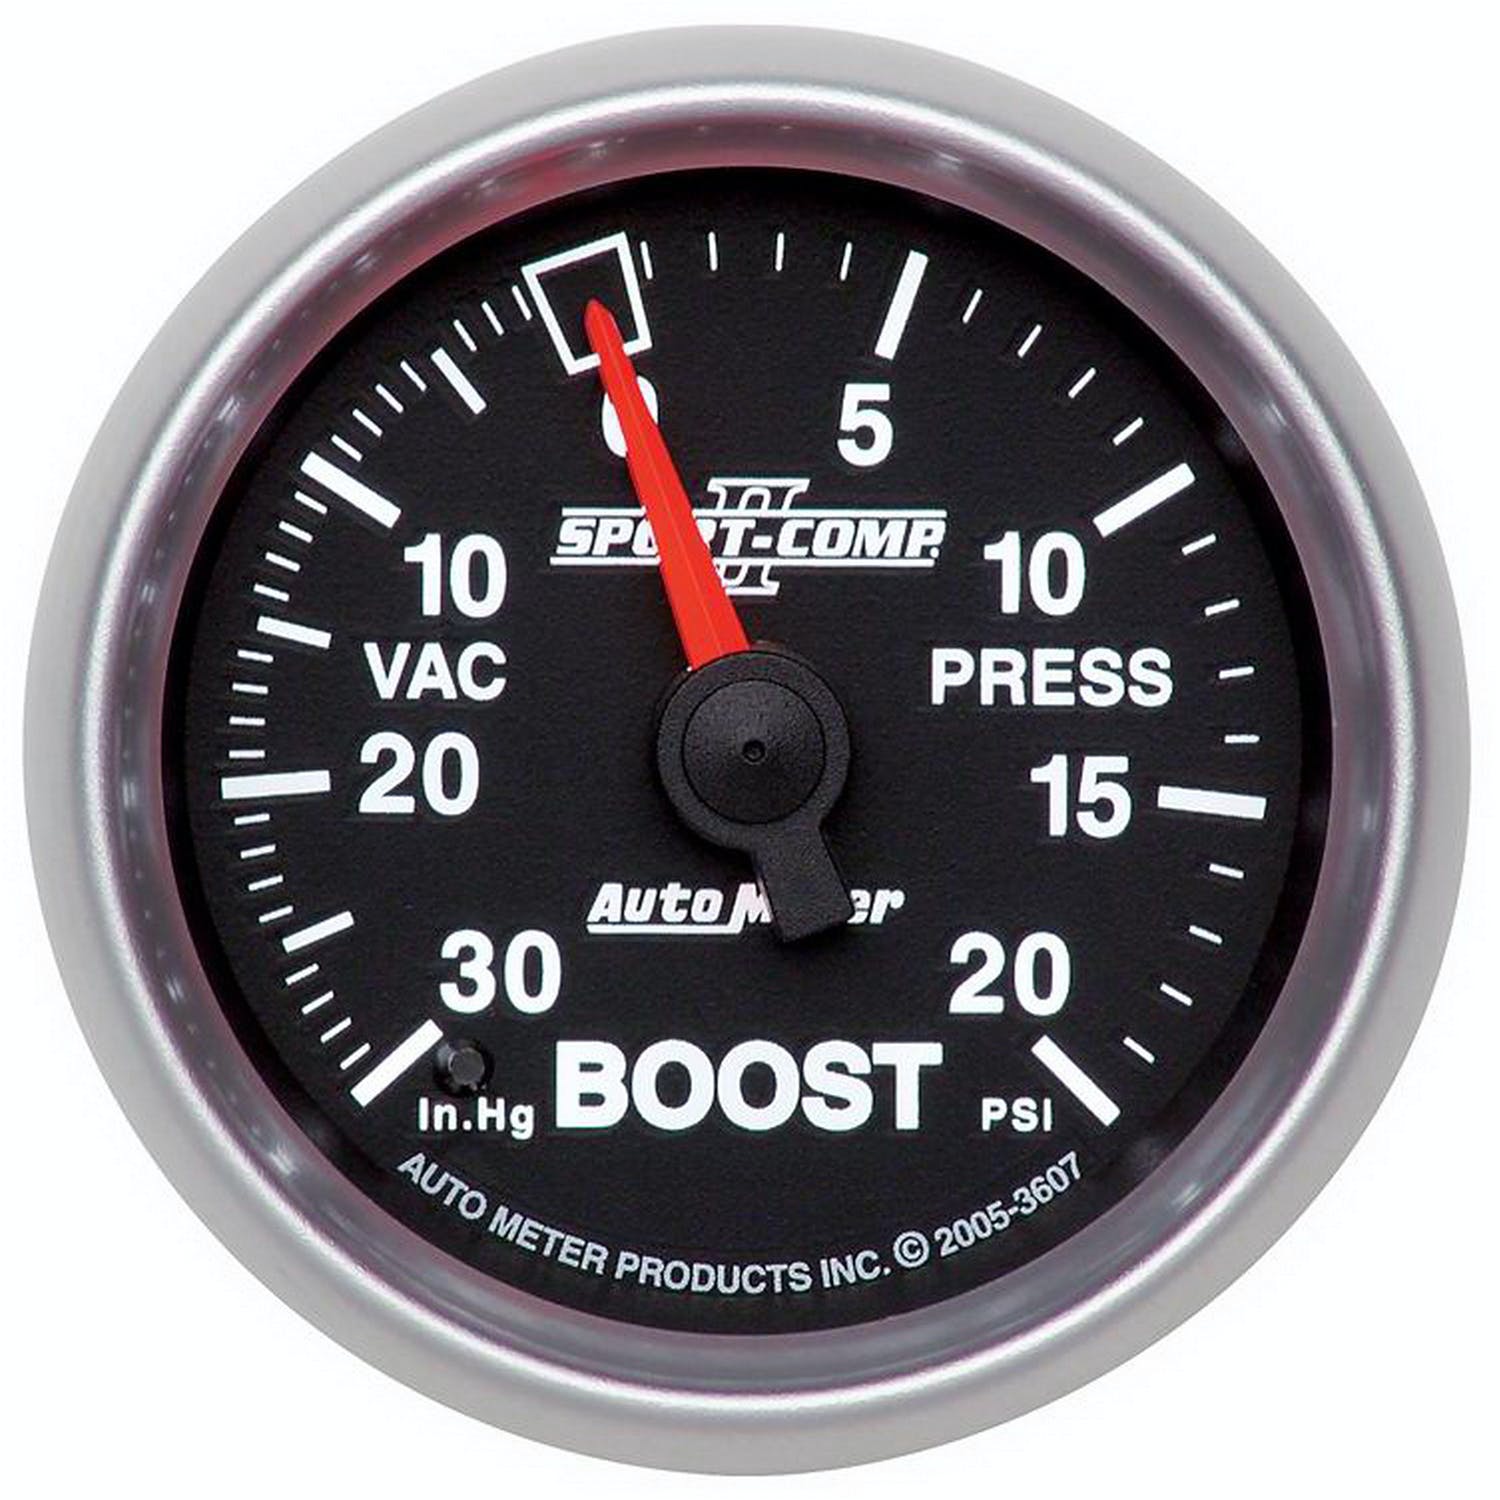 AutoMeter Products 3607 Boost/Vac 30in Hg/20 PSI Full Sweep